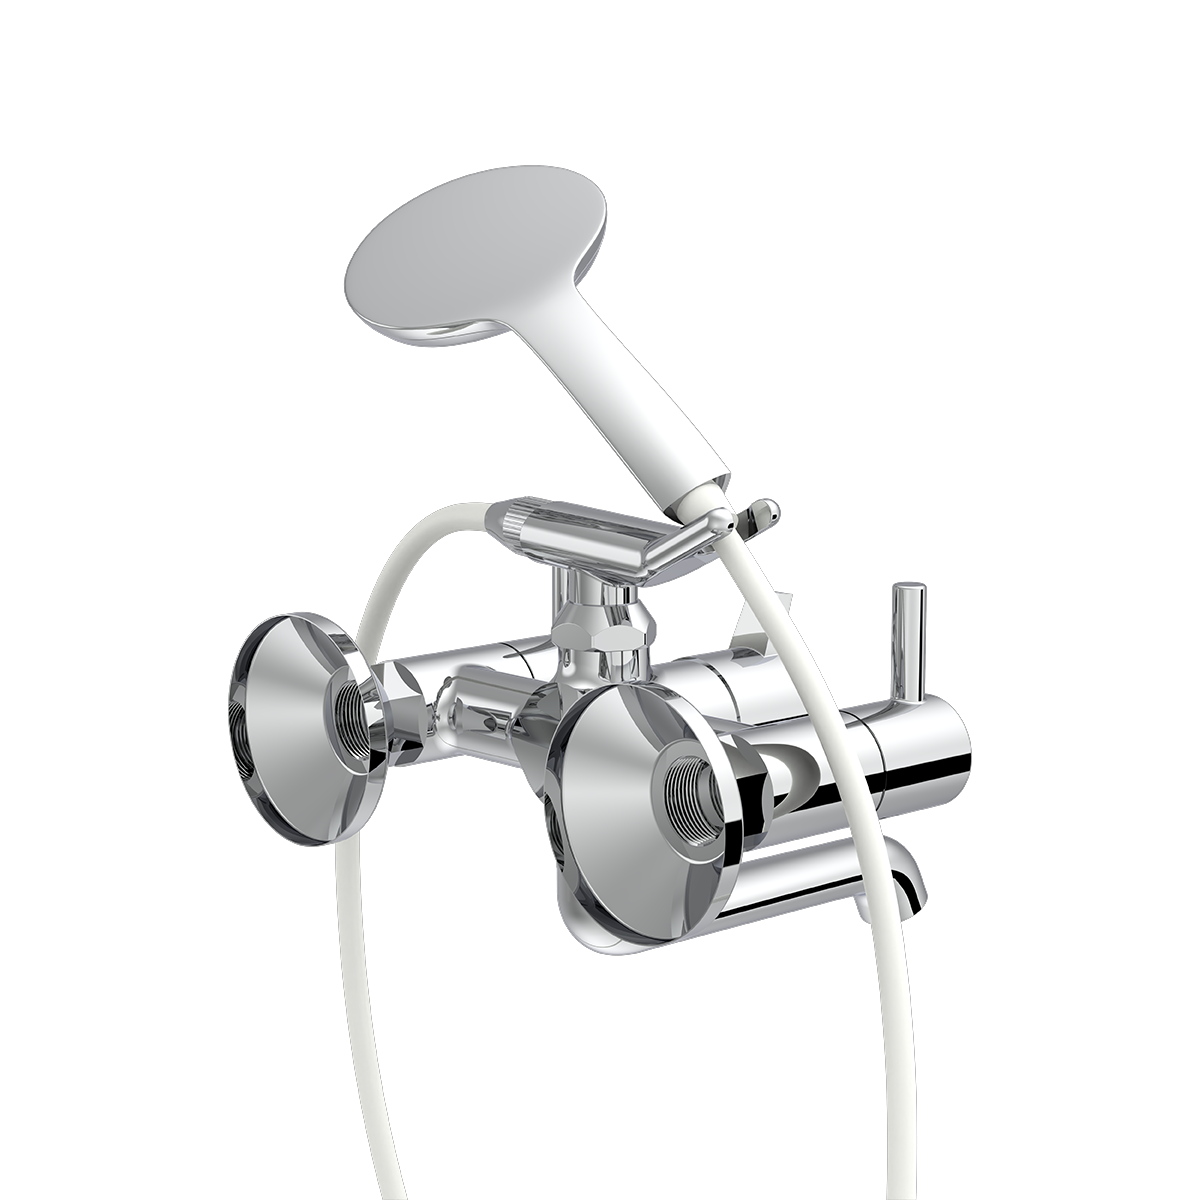 Wall Mixer With Provision Of Hand Shower With Crut